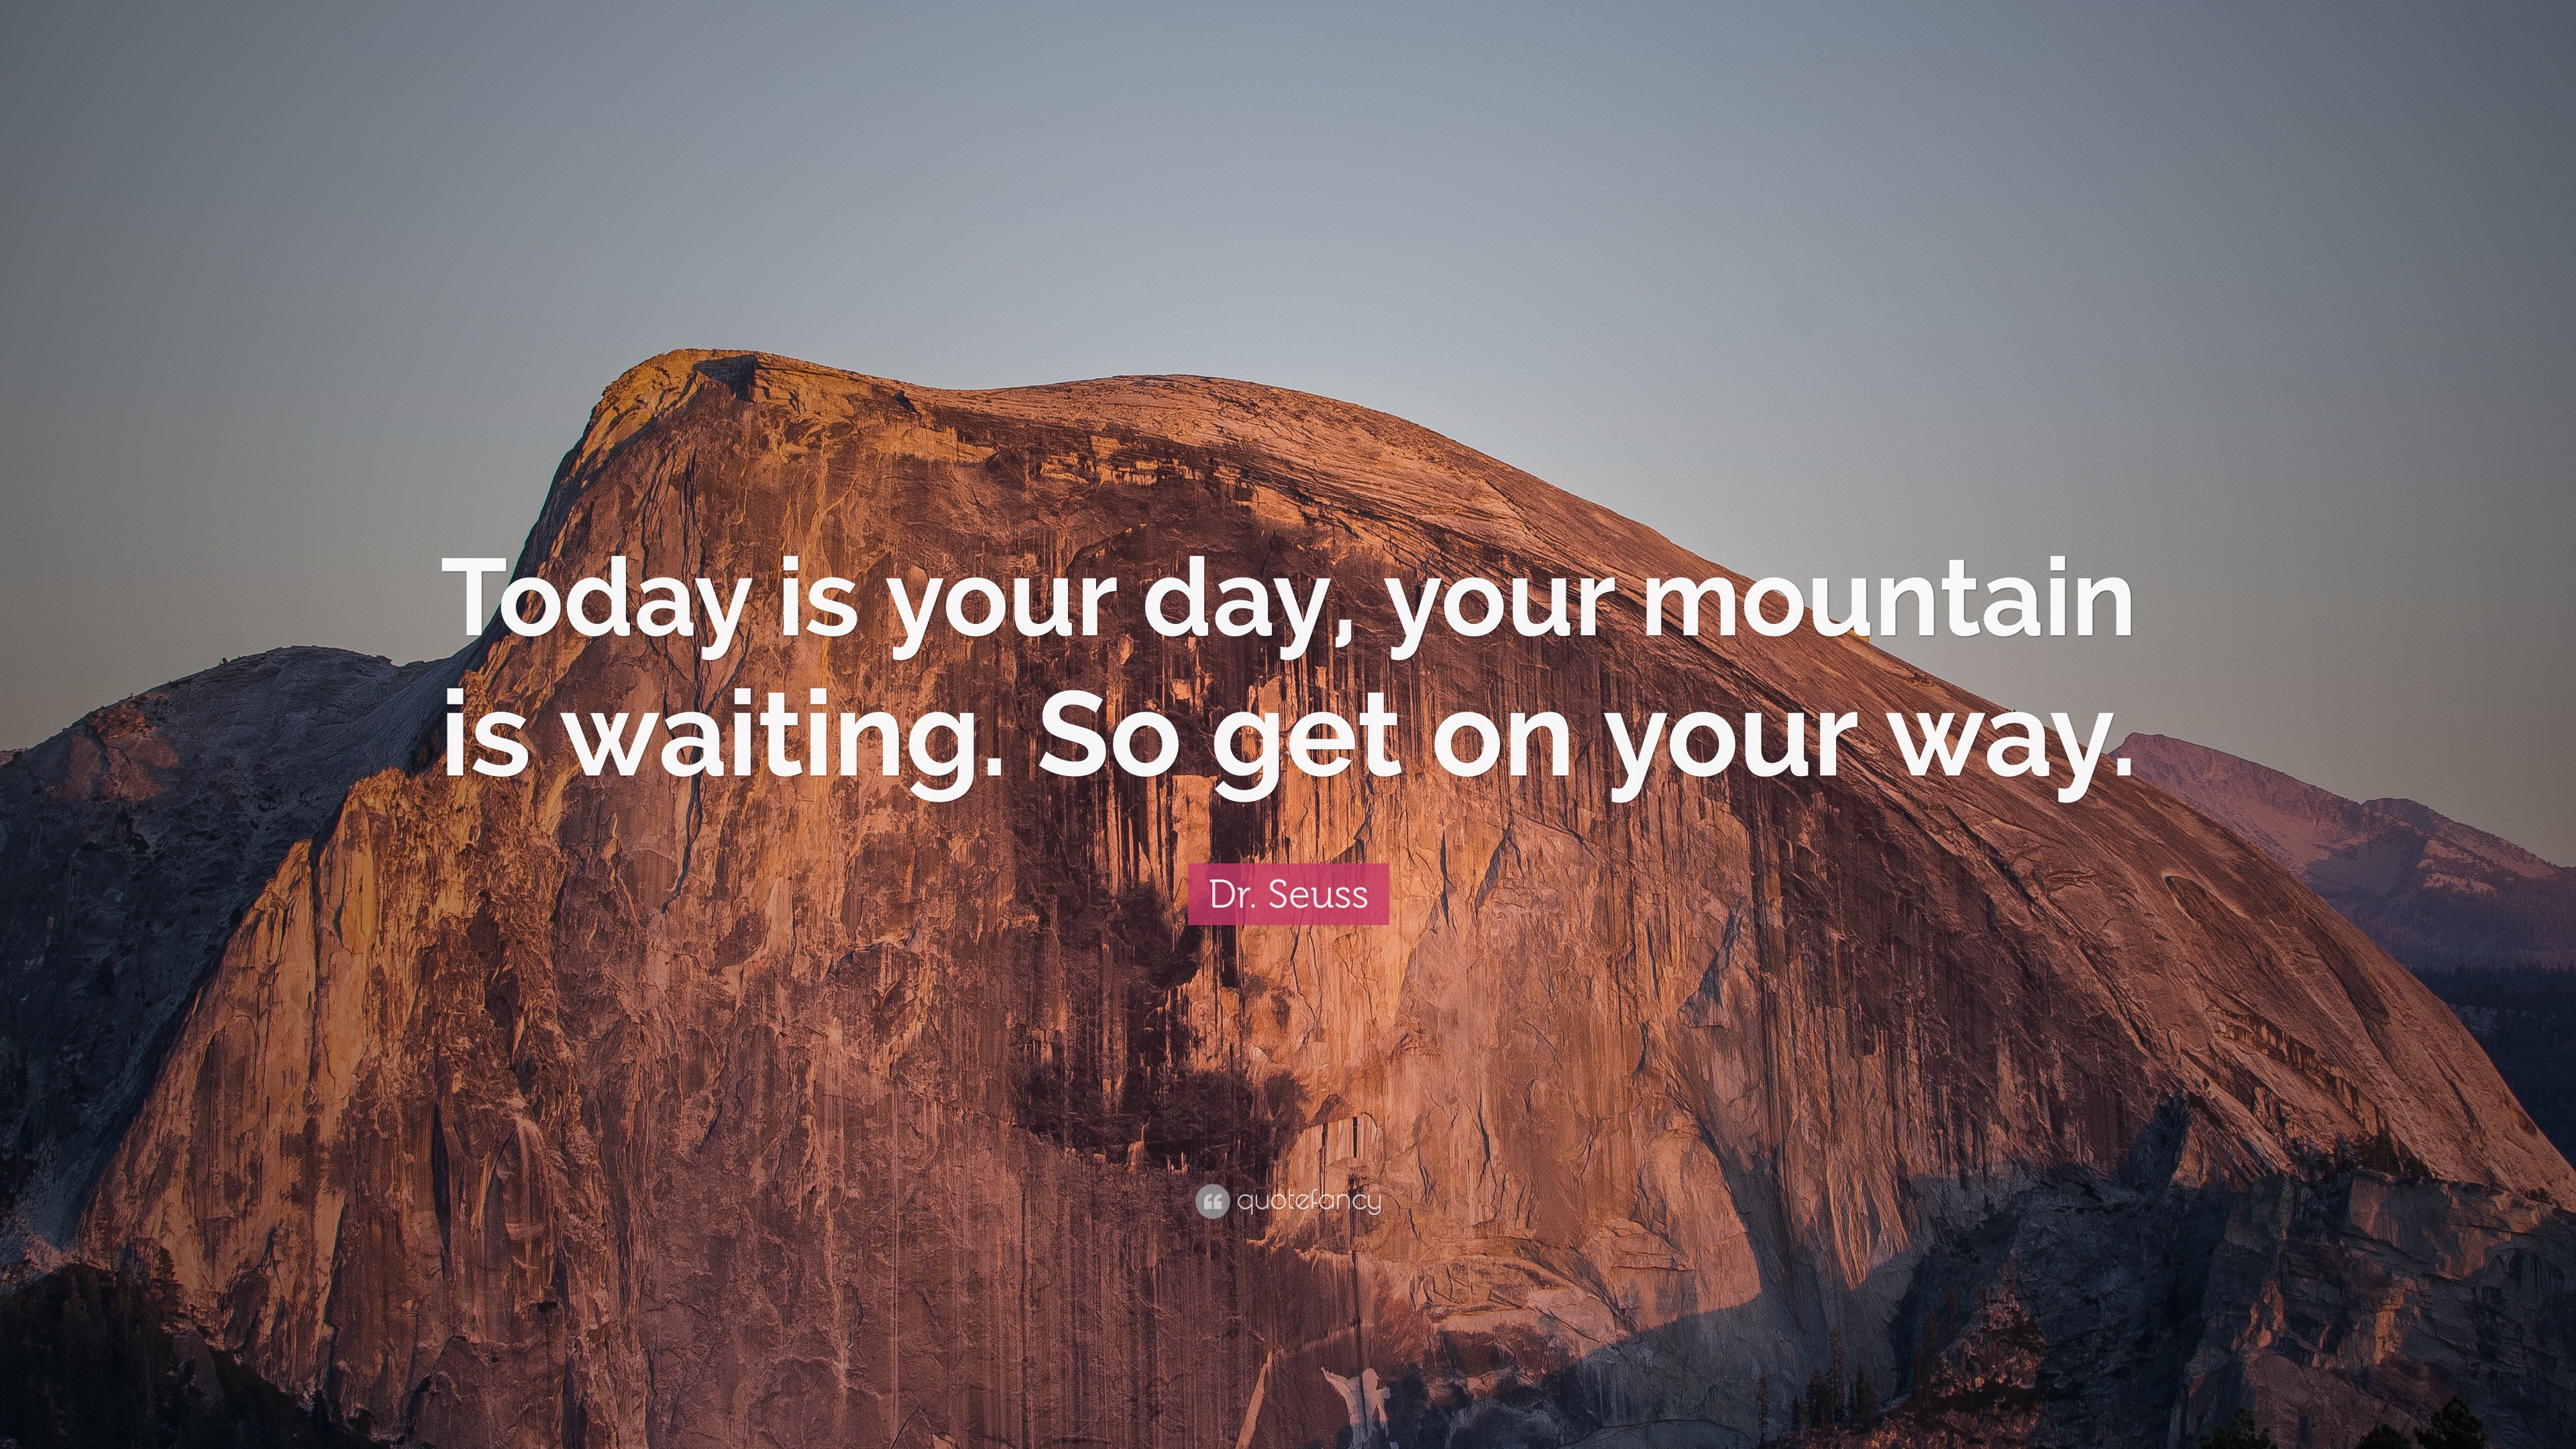 Dr. Seuss Quote: “Today is your day, your mountain is waiting. So get